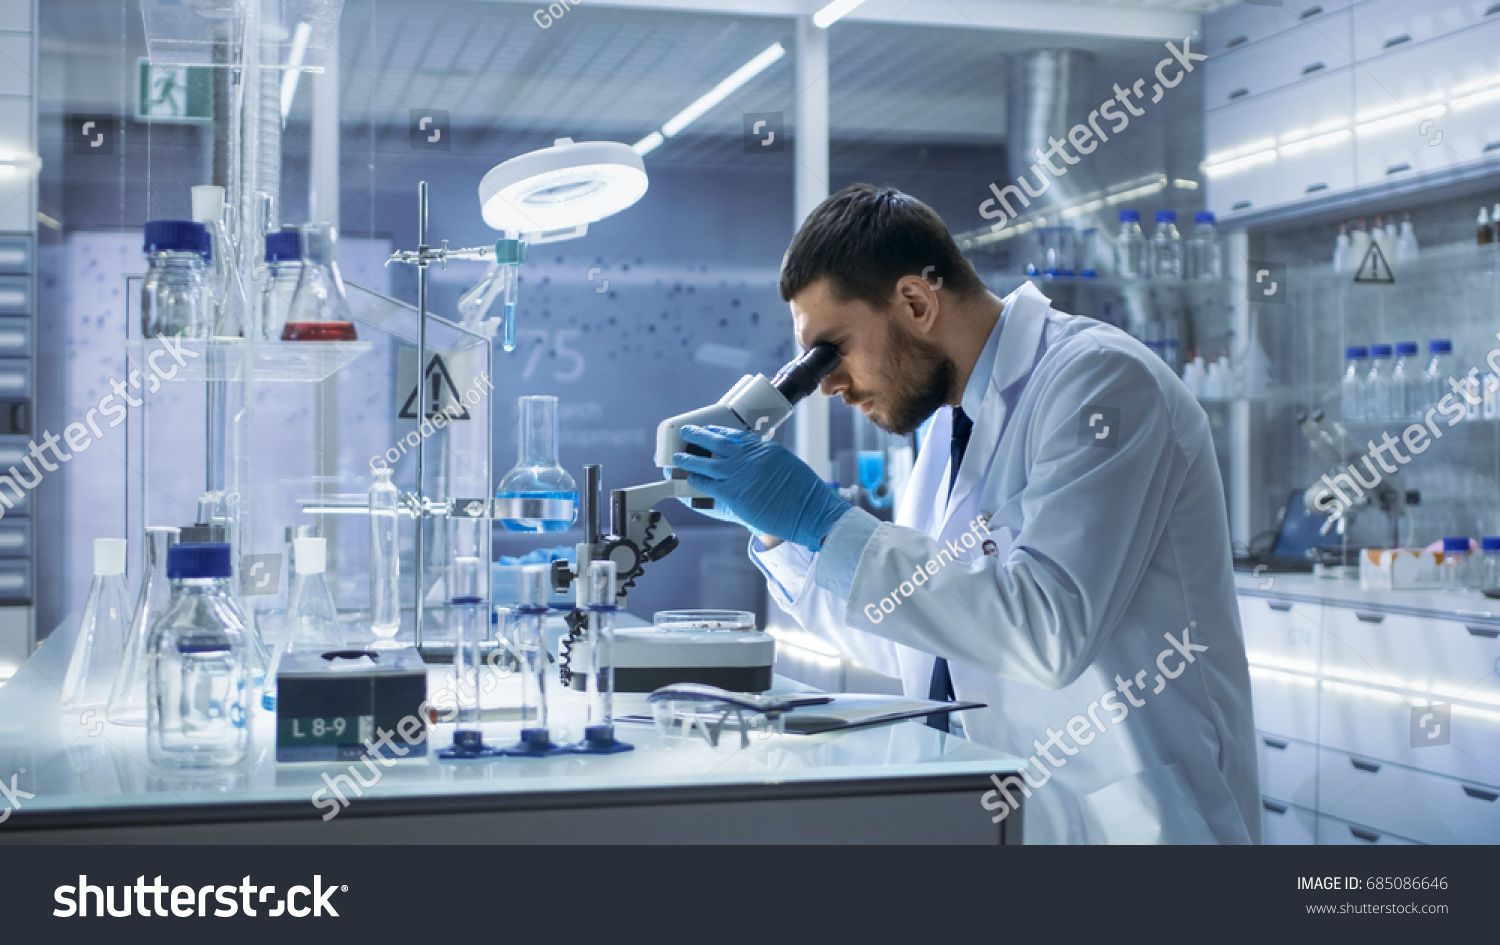 Research Scientist Looks into Microscope. He's Conducts Experiments in Modern Laboratory. #685086646